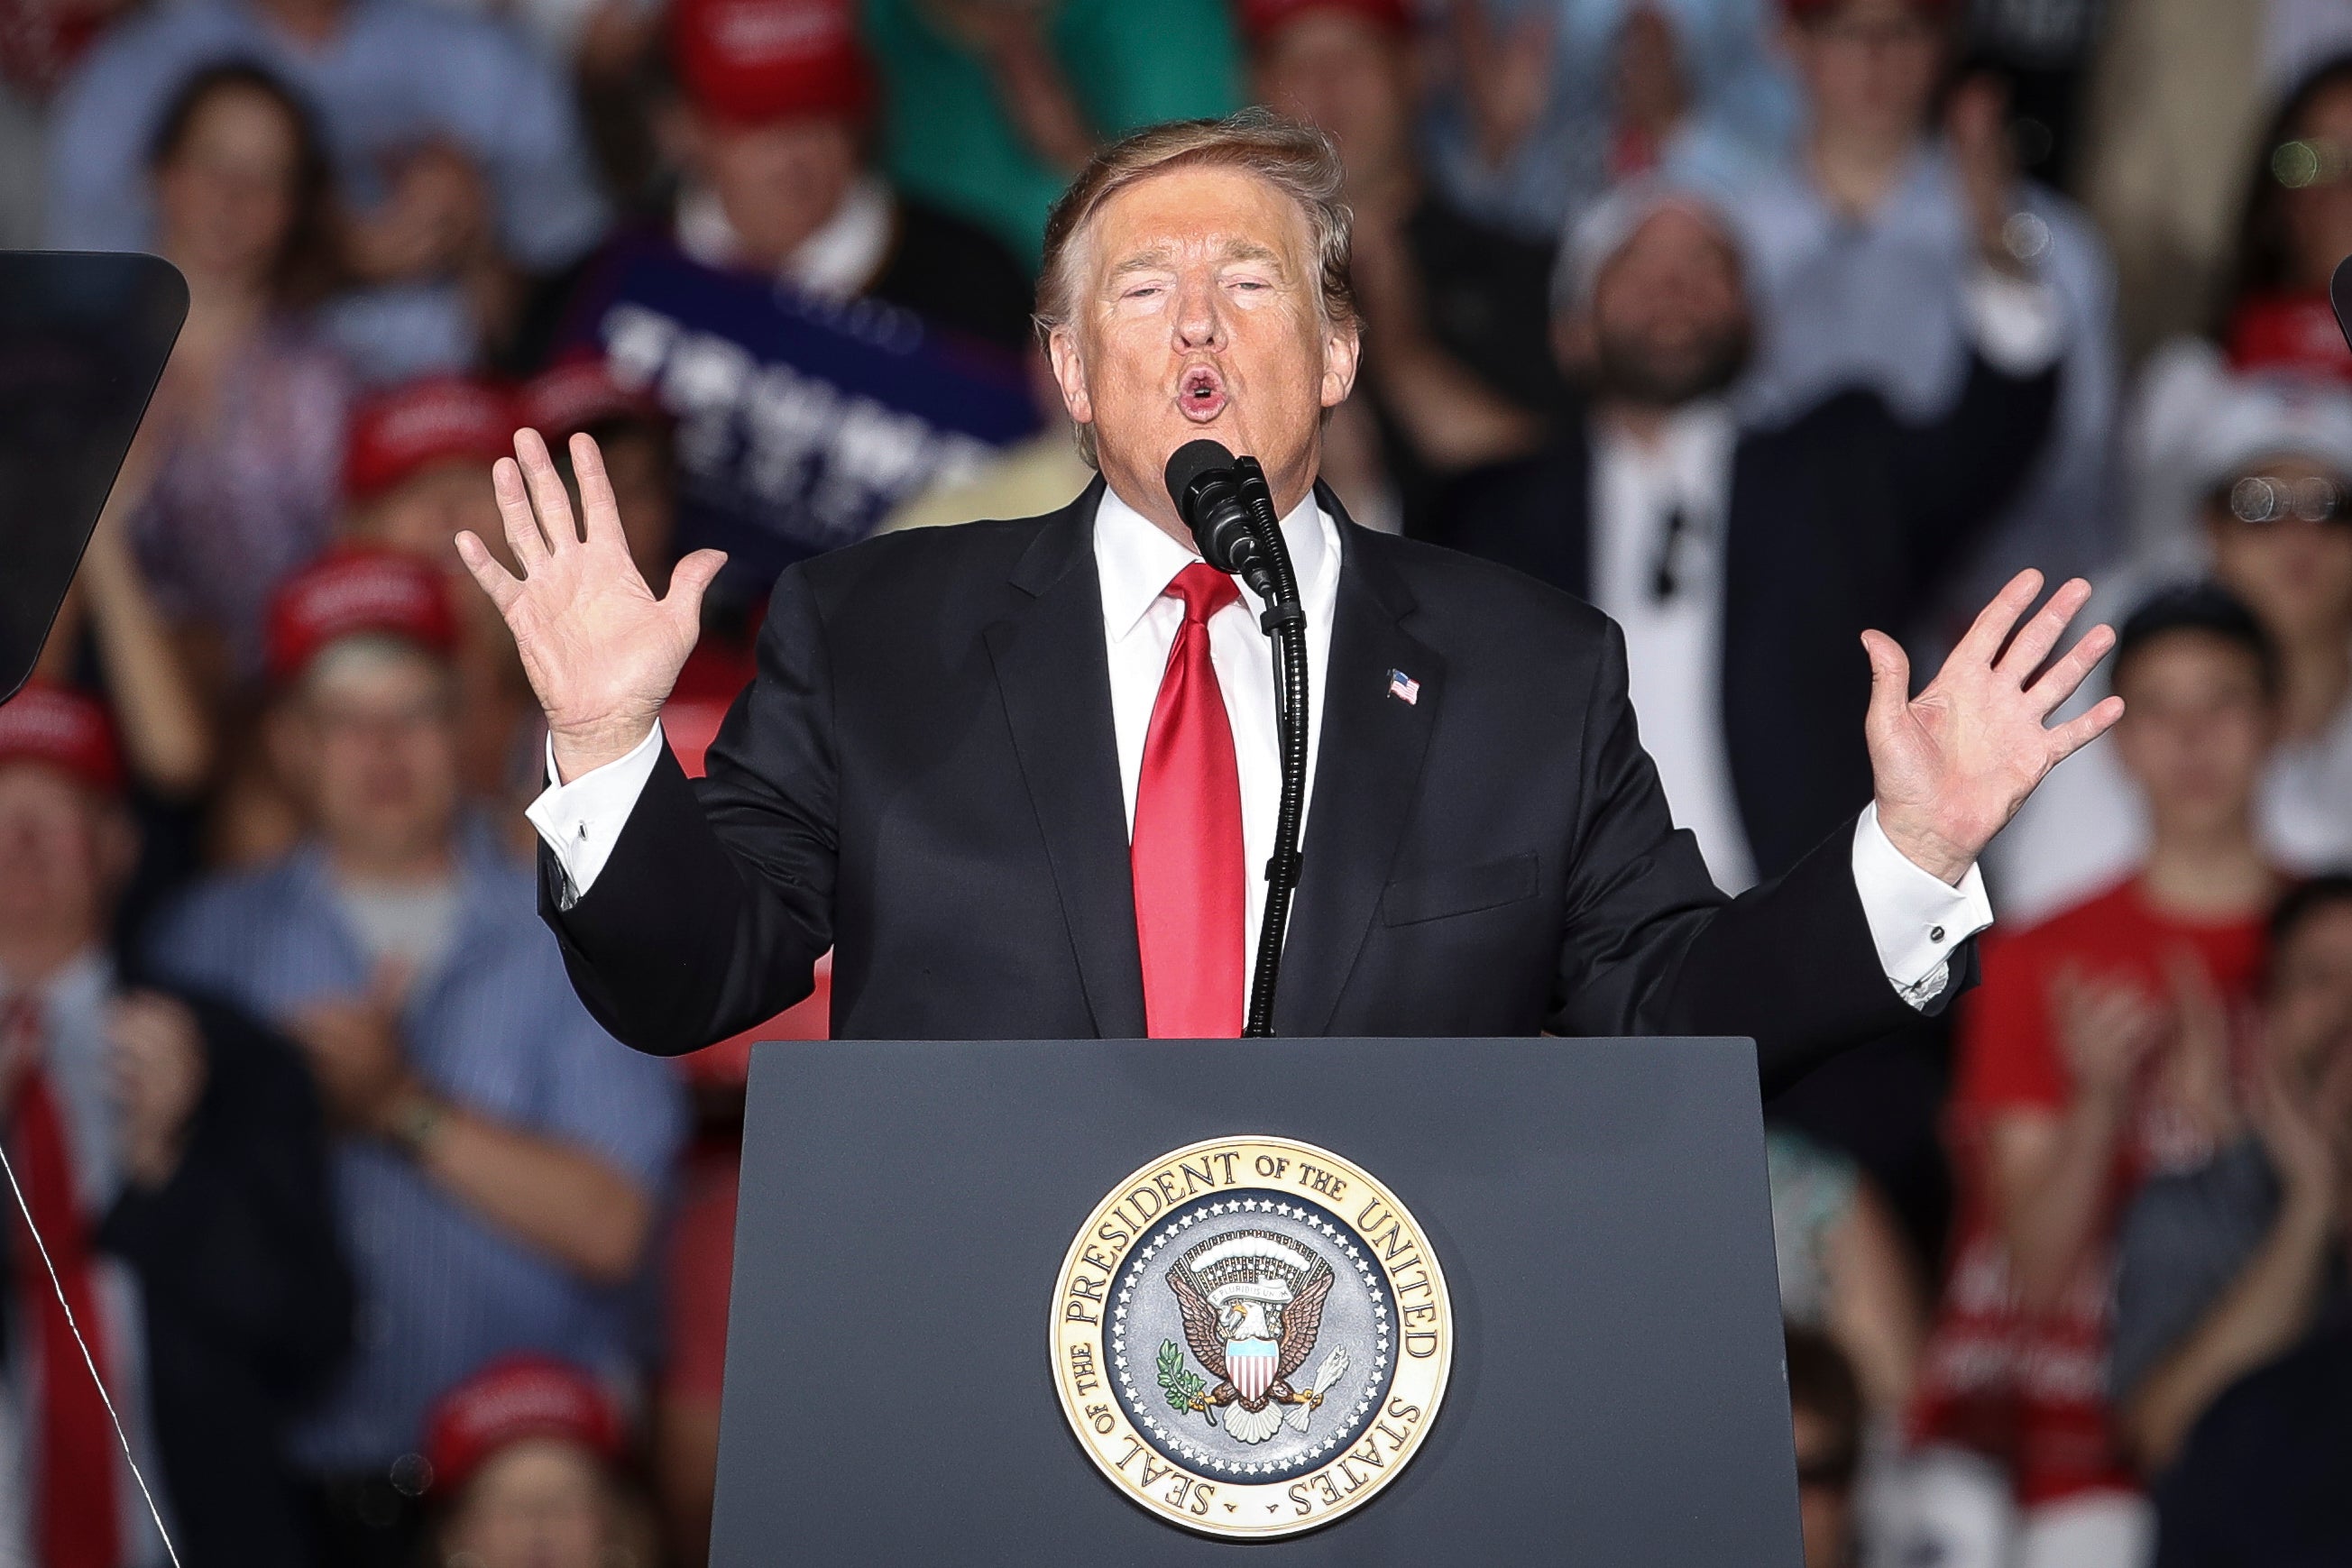 Then-President Donald Trump speaks during a ‘Make America Great Again’ campaign rally at Williamsport Regional Airport, 20 May , 2019 in Montoursville, Pennsylvania. The FEC is facing a lawsuit over its decision not to pursue an investigation into alleged campaign finance violations by the Trump campaign.